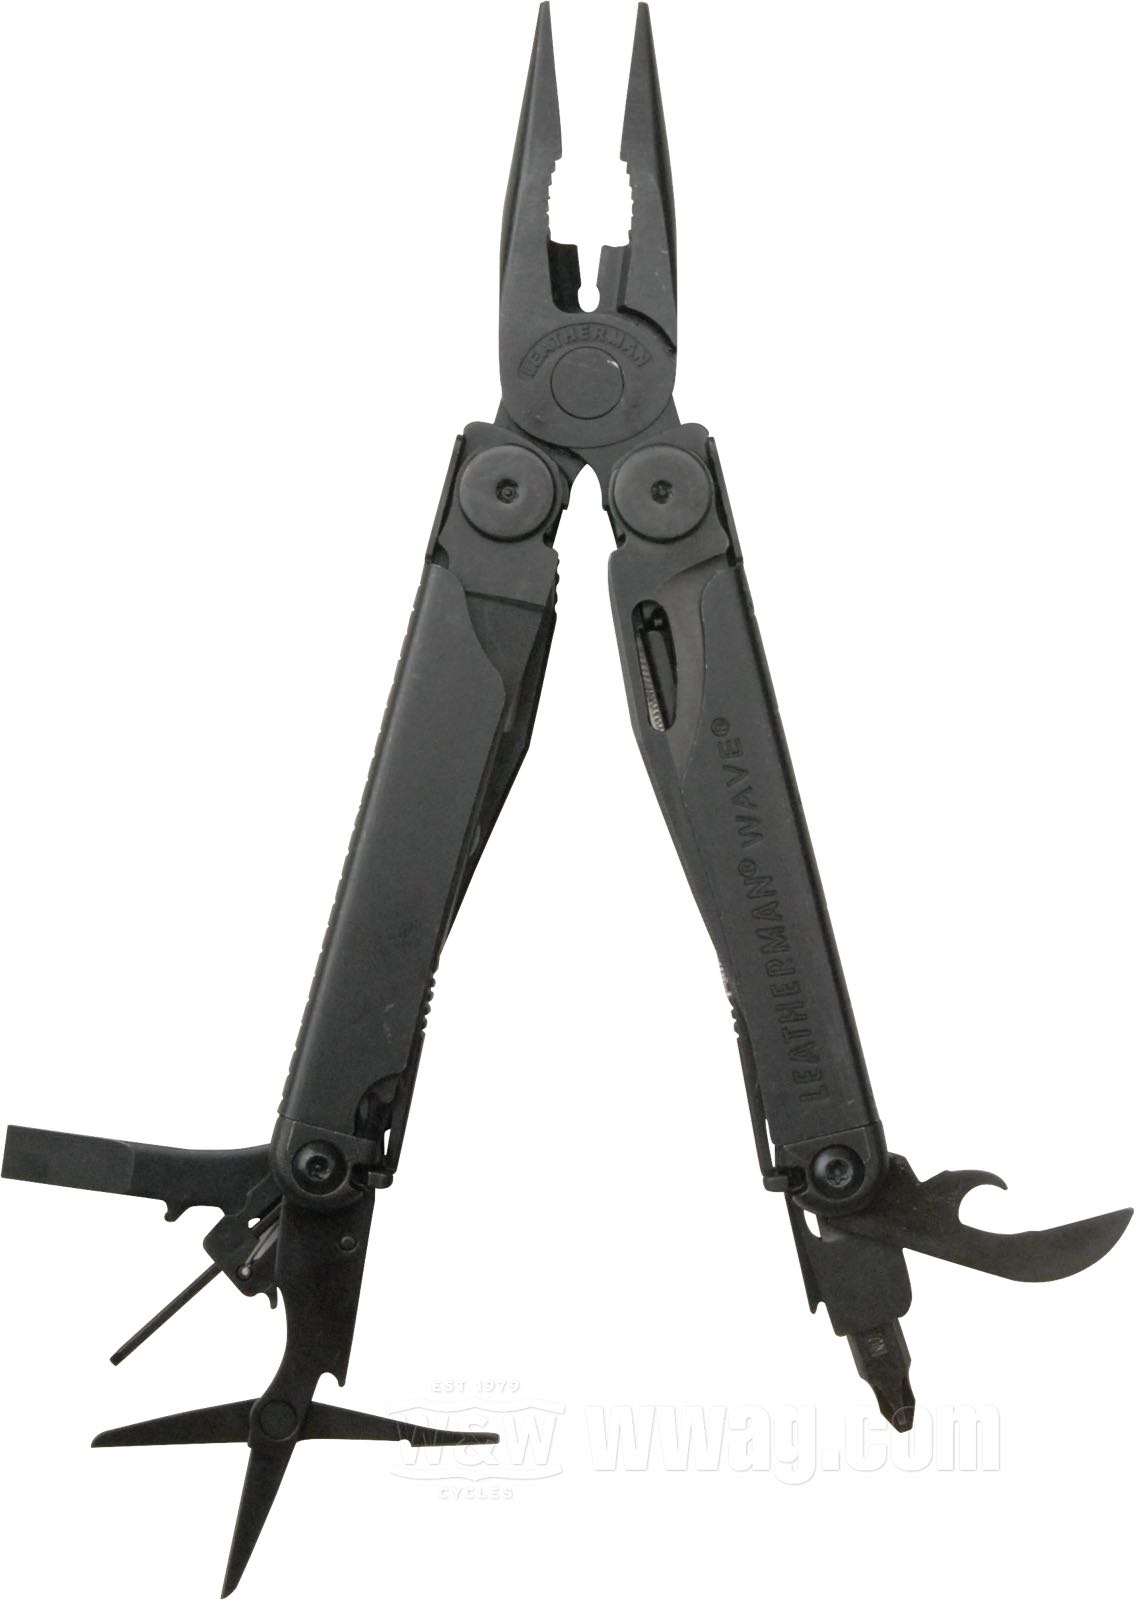 W&W Cycles - Leatherman WAVE Multitool for Harley-Davidson